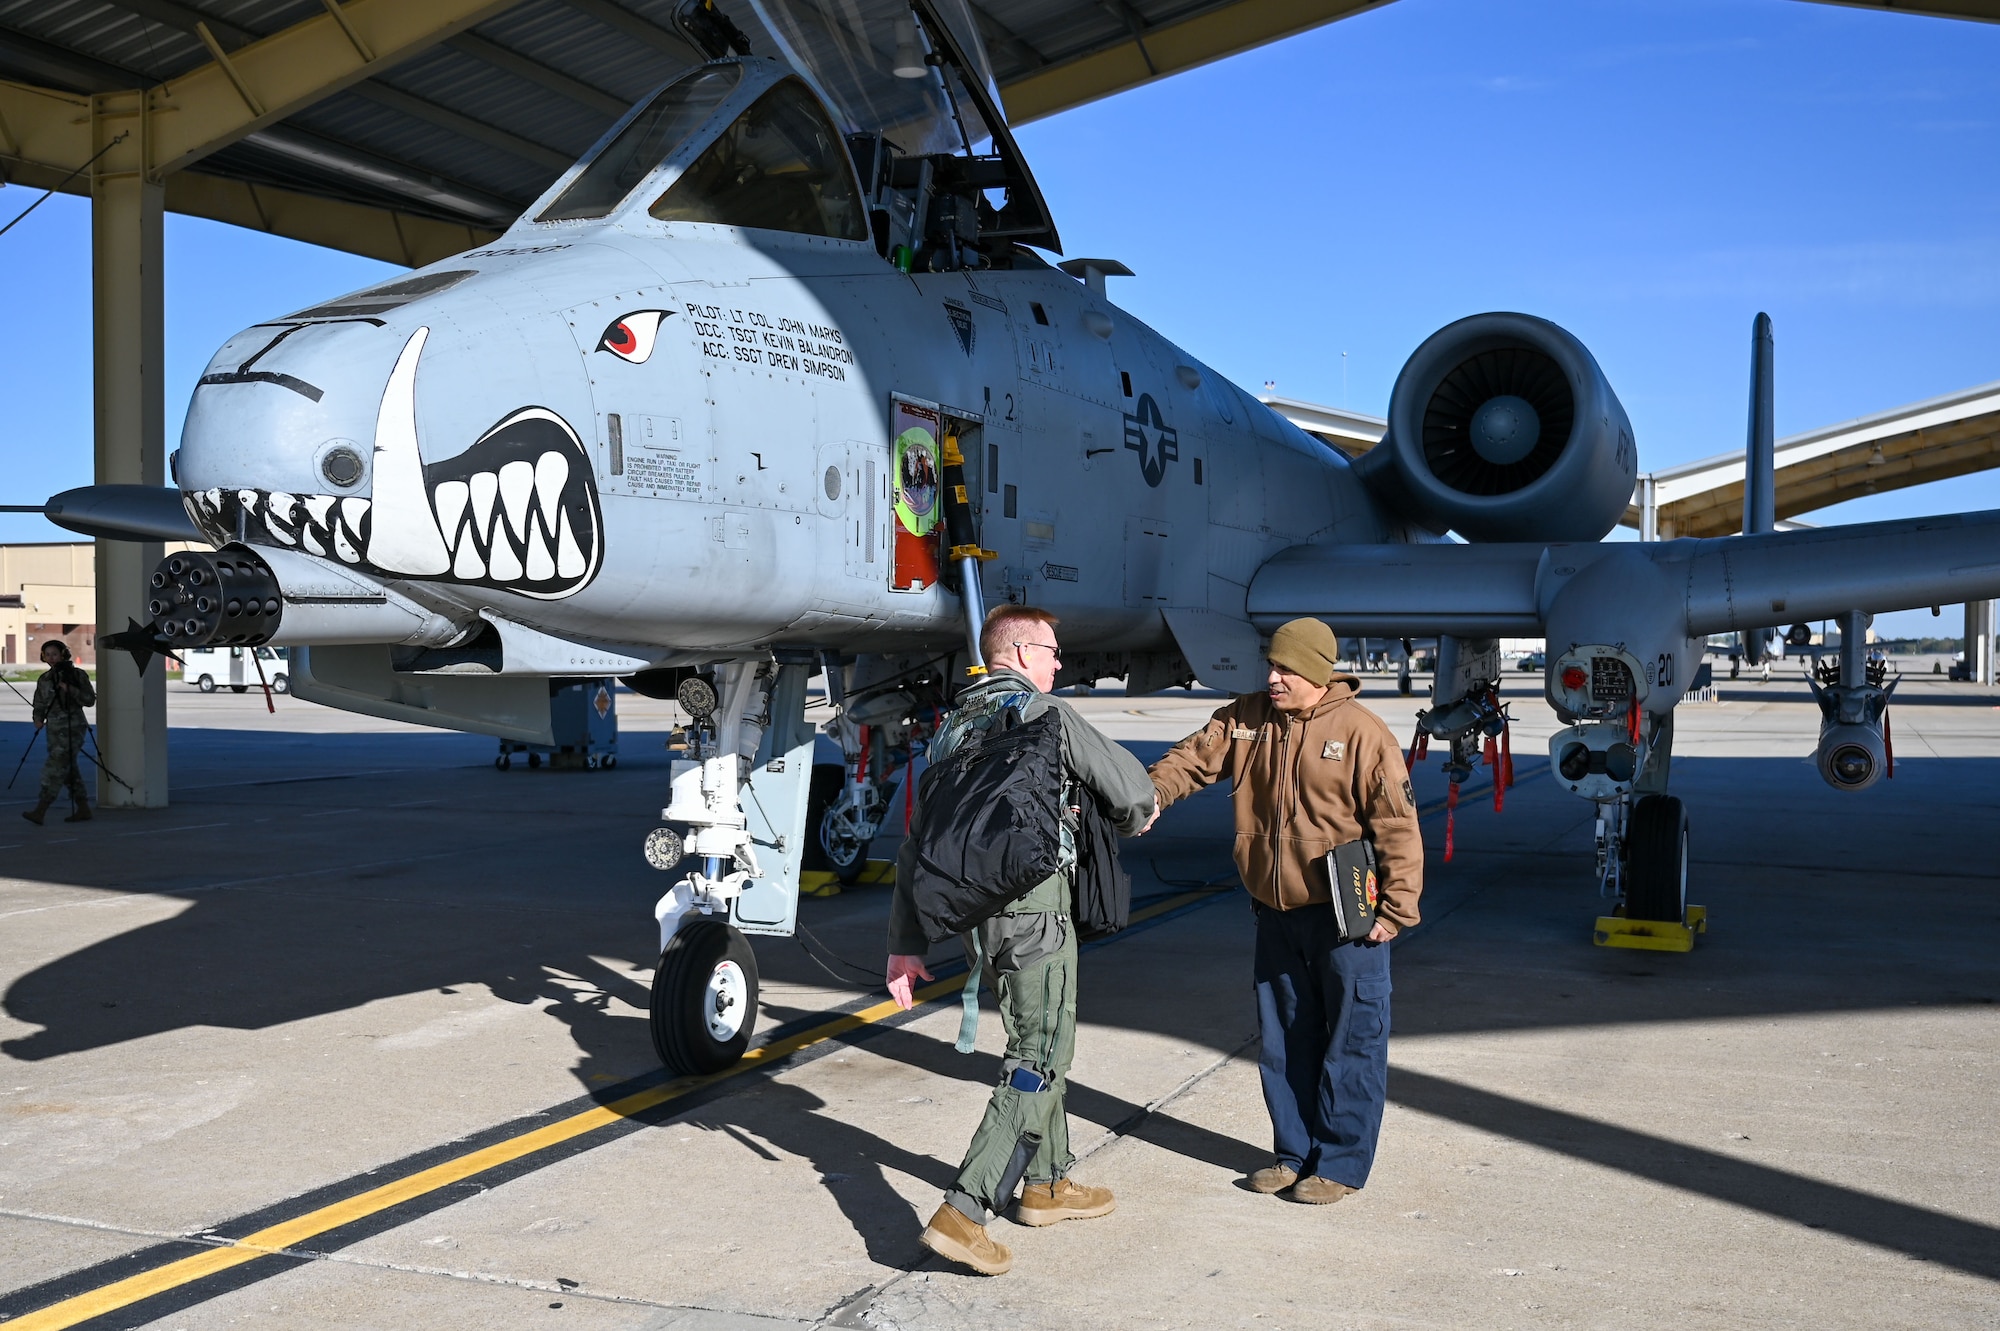 A man in a green flight suit carrying a black backpack shakes the hand of a man in a brown coat over blue overalls next to an A-10 Thunderbolt II attack aircraft.